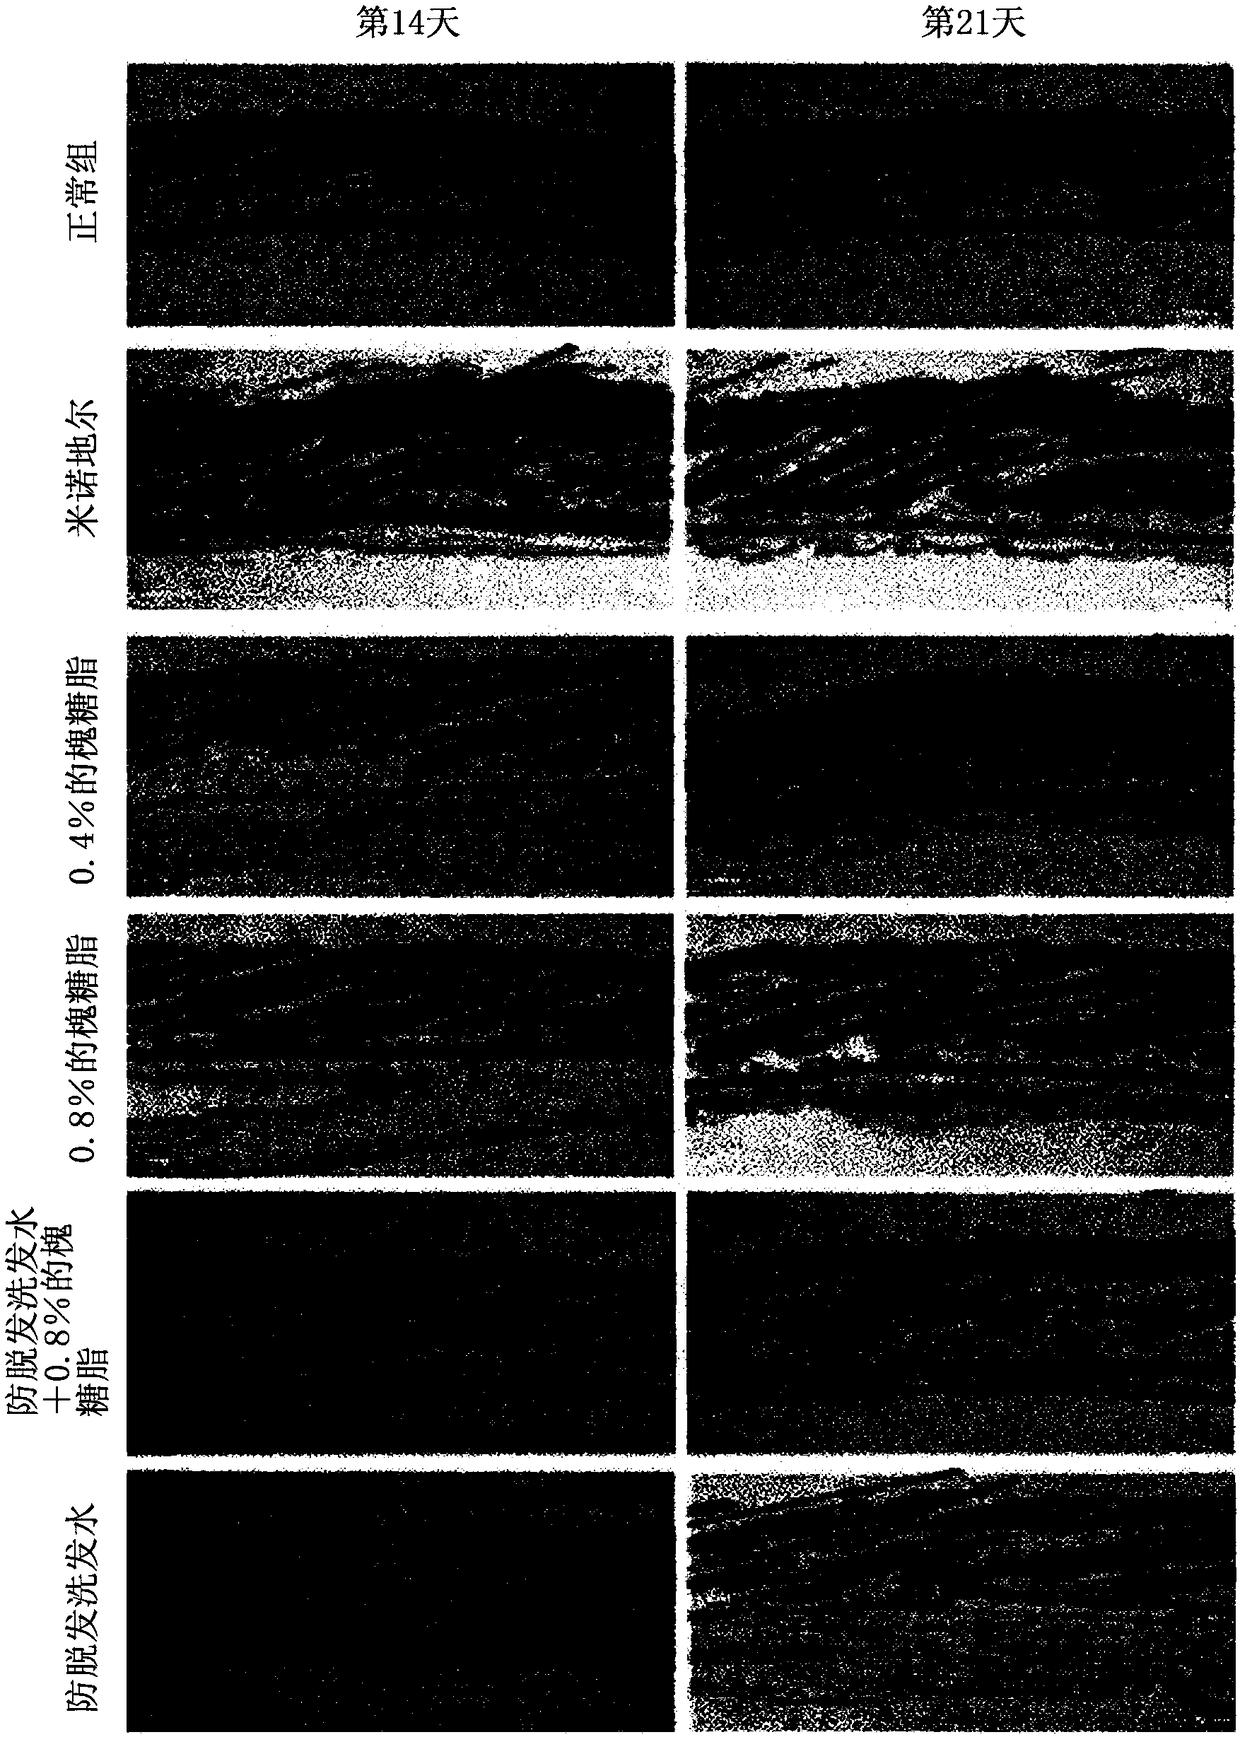 Composition for preventing hair loss or stimulating hair growth comprising sophorolipid as effective component